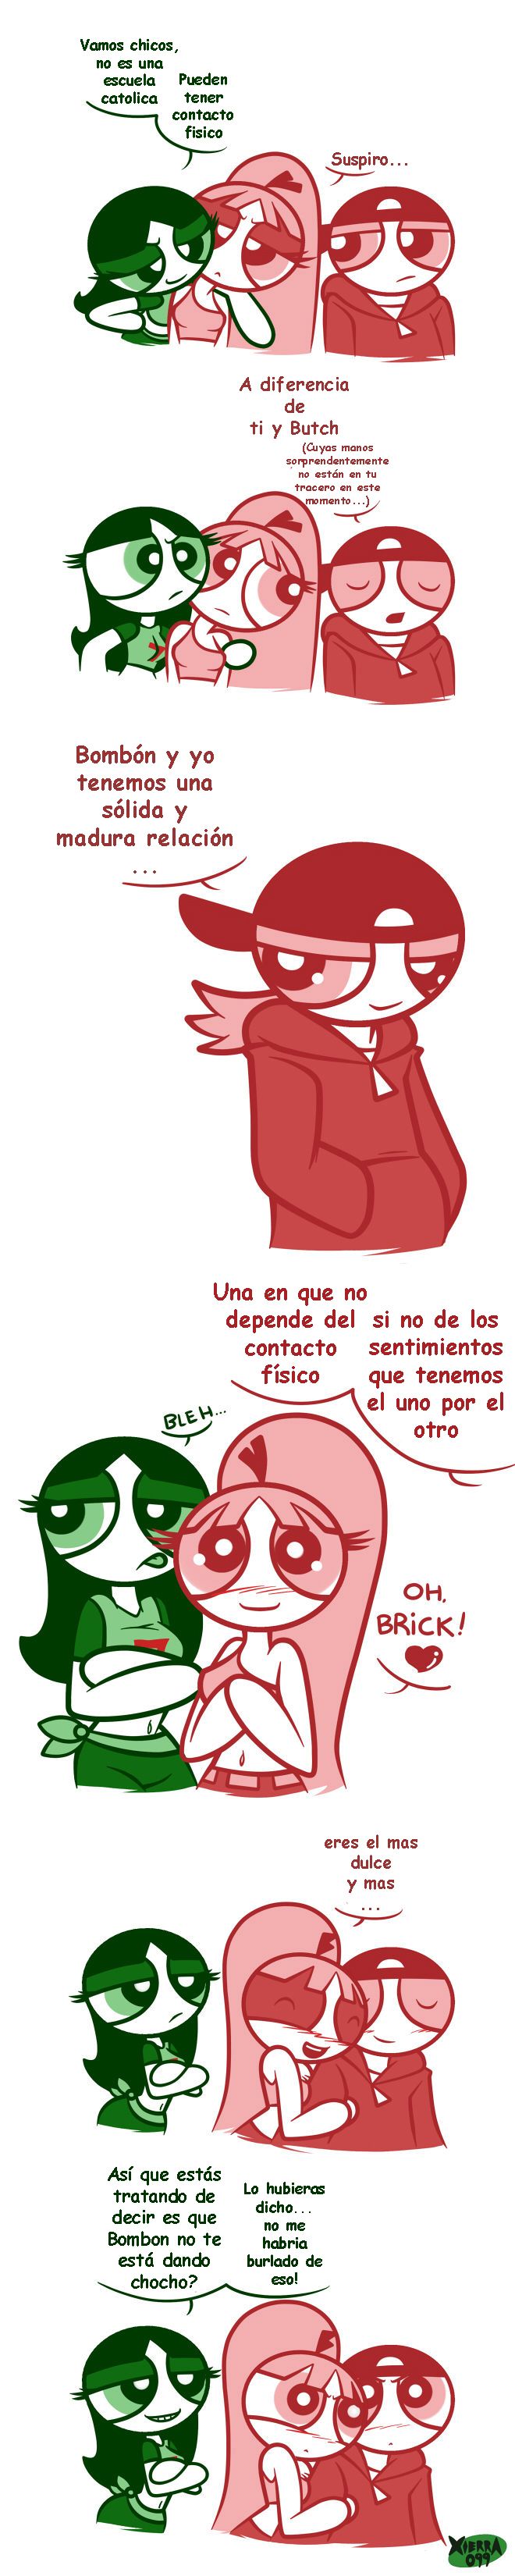 [Xierra099] PPG Strips [Ongoing] Spanish 7